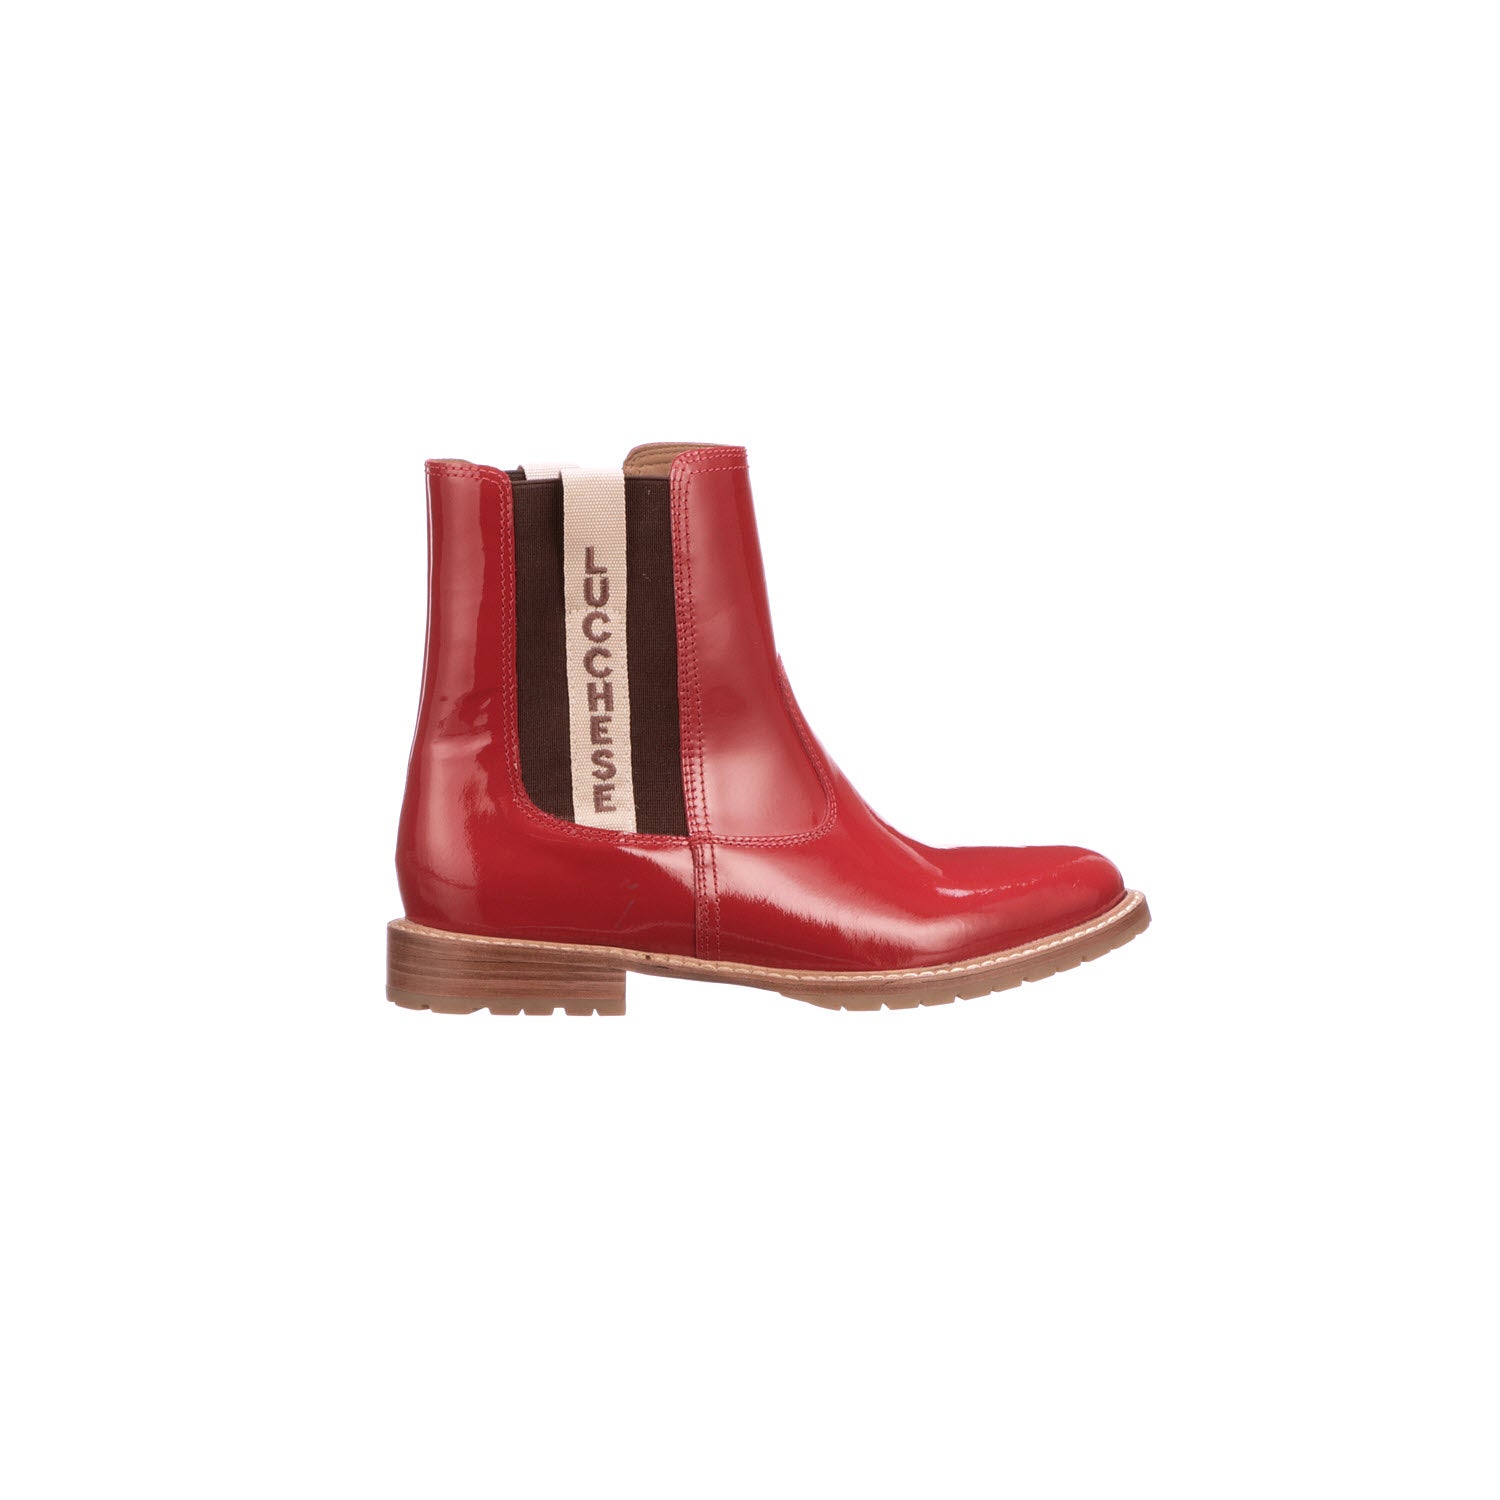 All-Weather Ladies Garden Boot :: Red